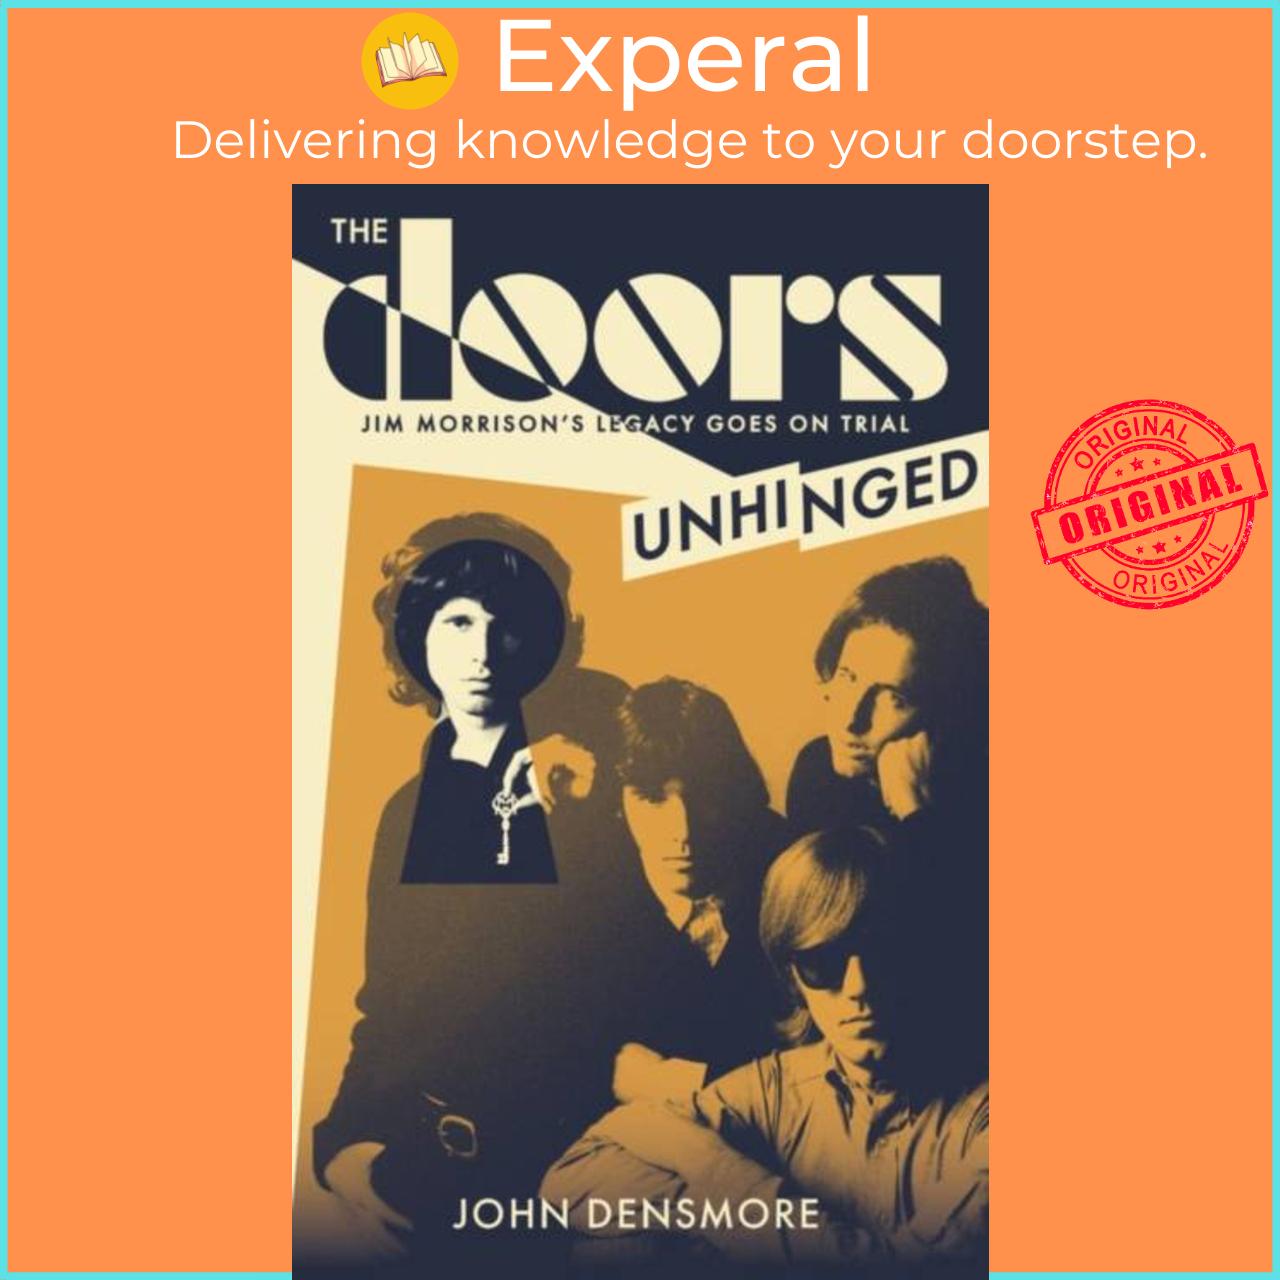 Sách - The Doors Unhinged - Jim Morrison's Legacy Goes on Trial by John Densmore (UK edition, hardcover)